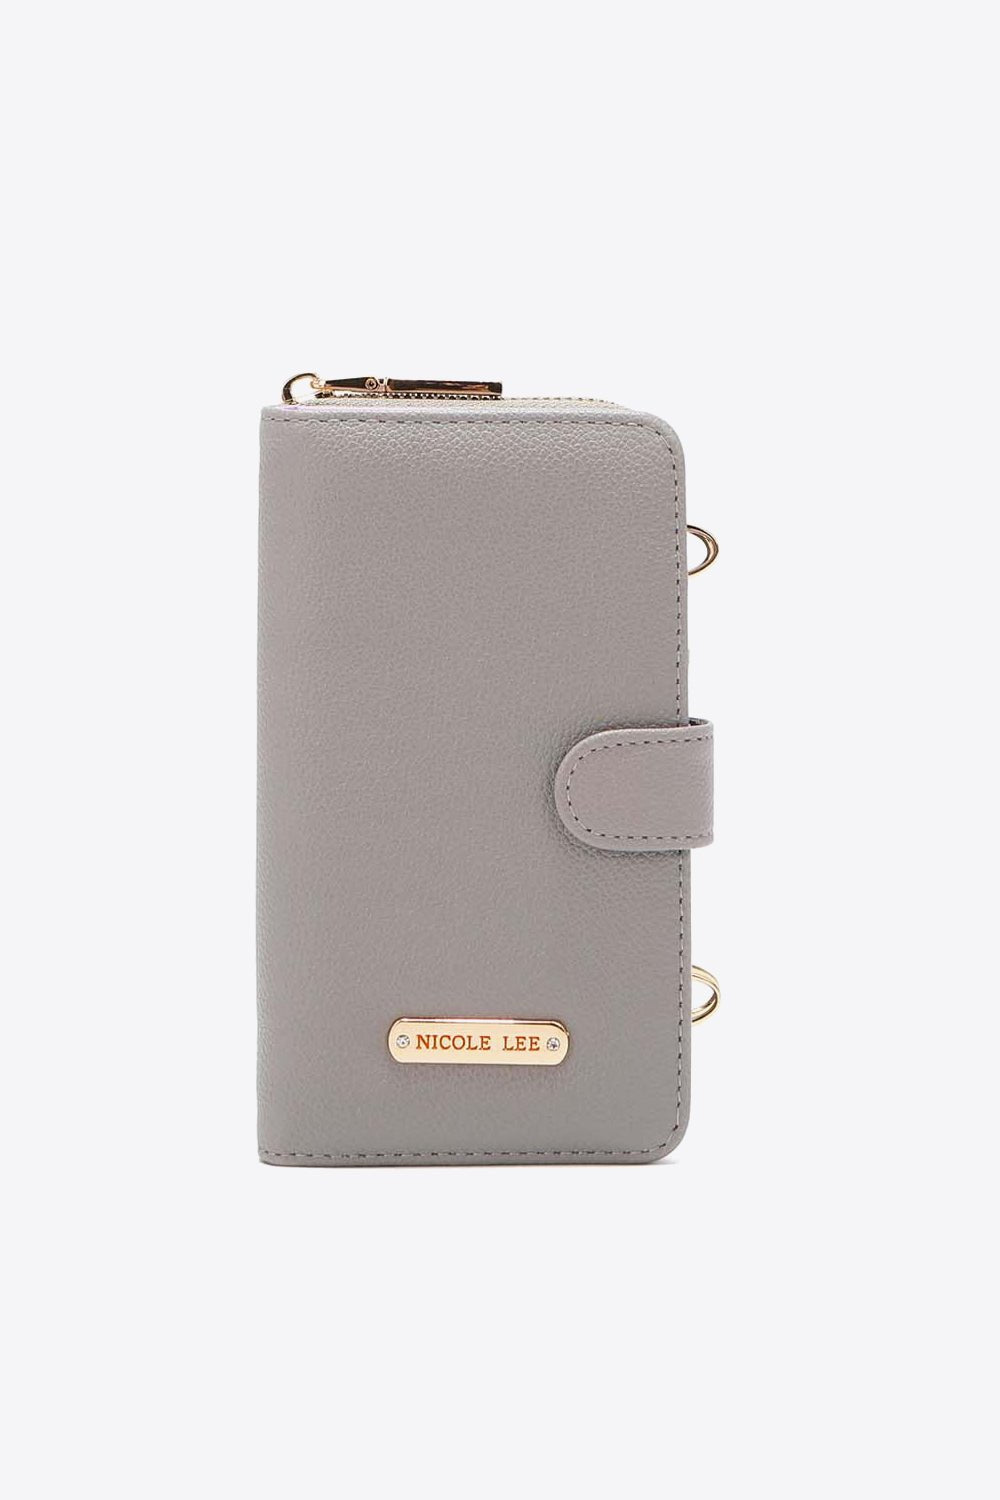 nicole lee usa two piece crossbody phone case wallettrendsimodsoul contemporary womens clothing 341861